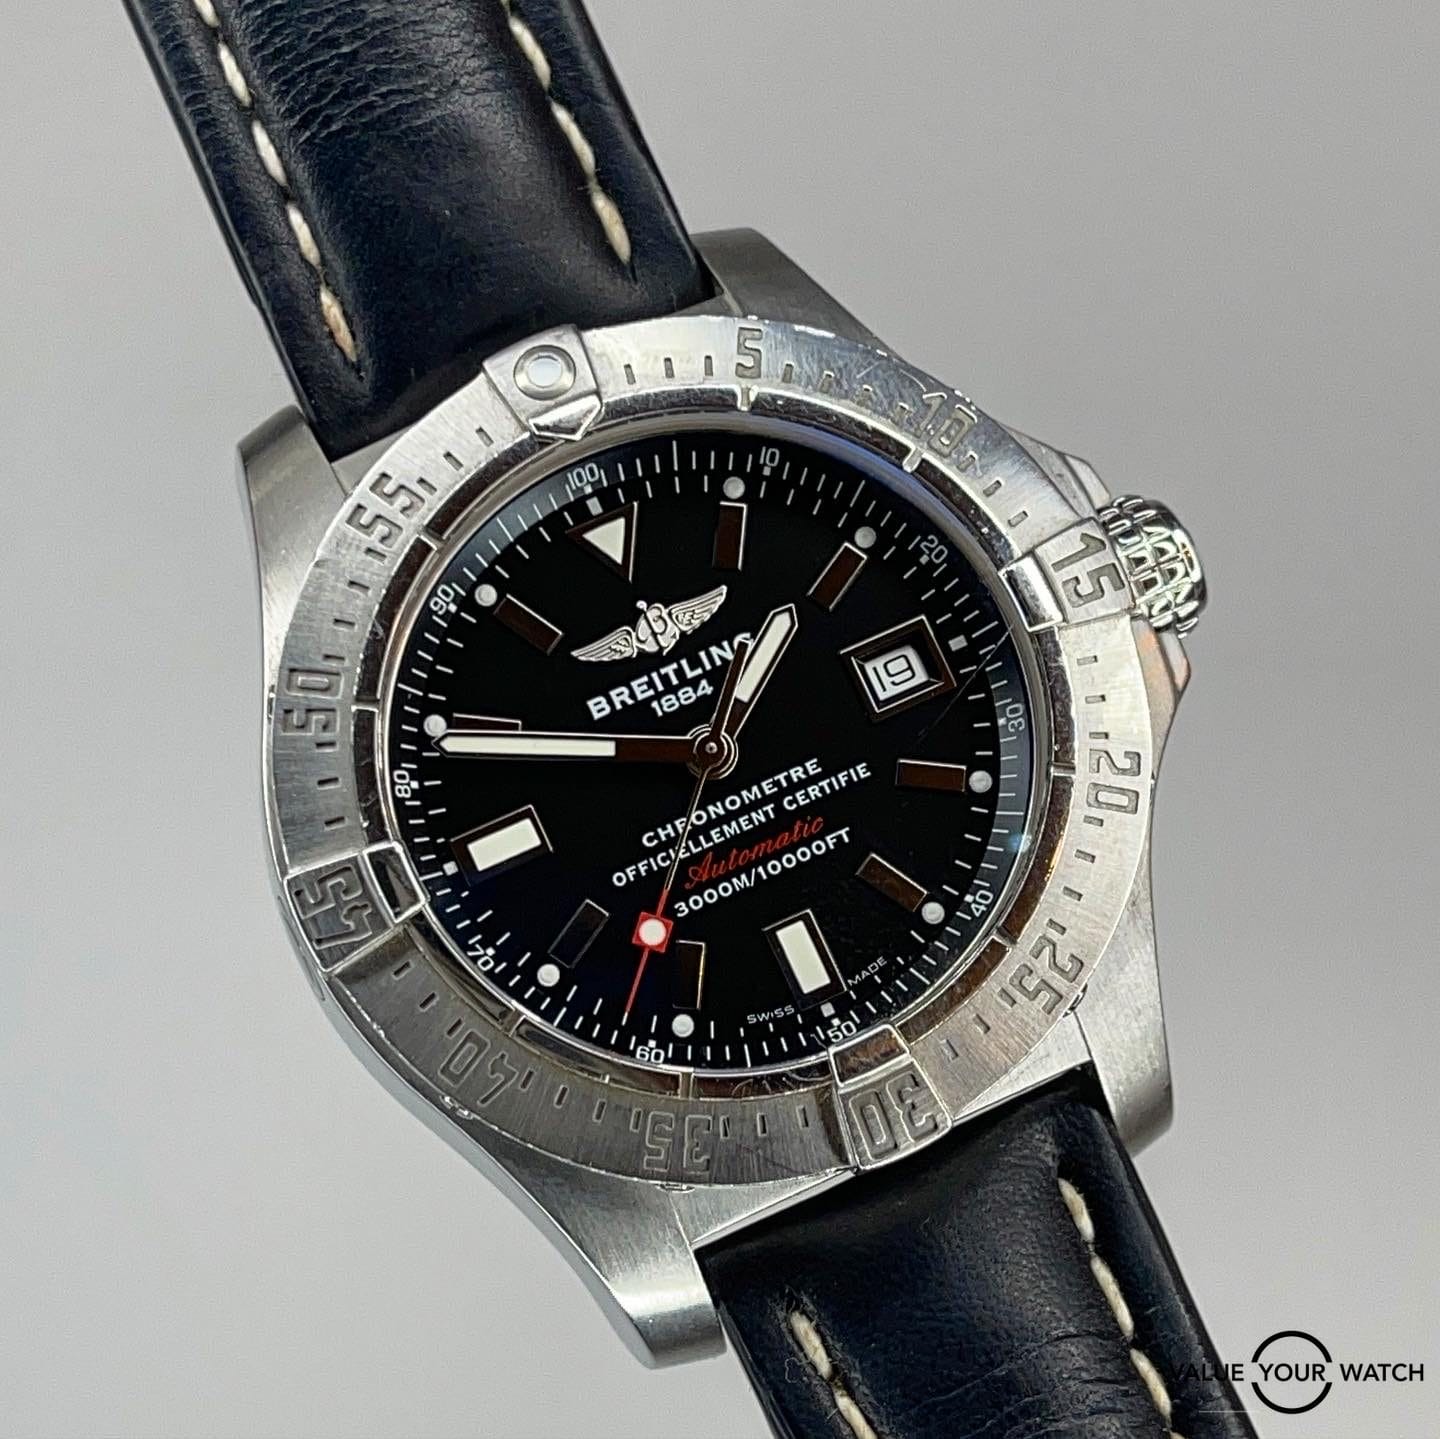 BREITLING Avenger Seawolf A17330 leather